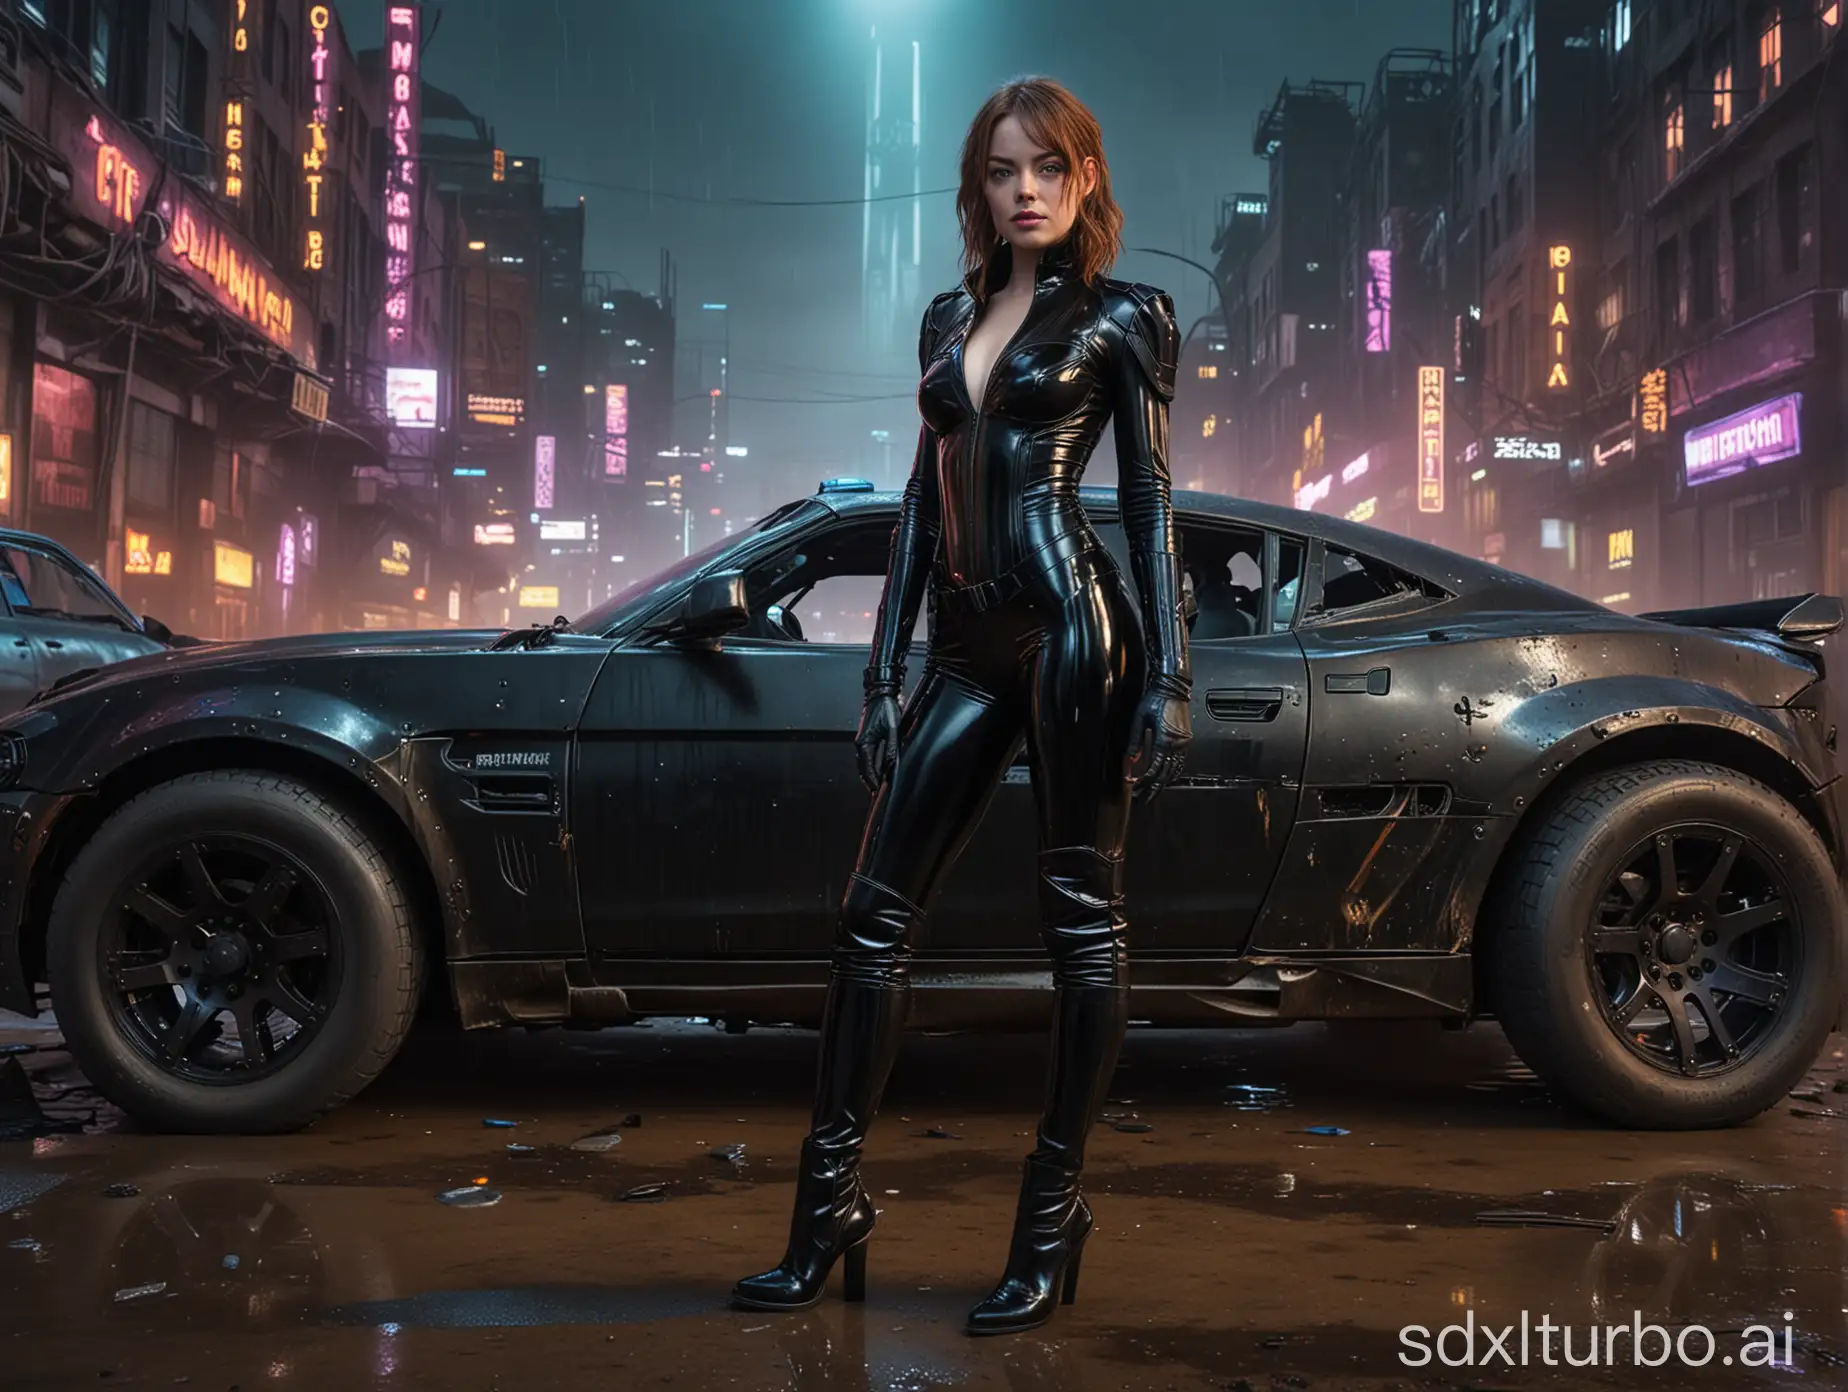 Cyberpunk-Police-Emma-Stone-Stands-in-Shiny-PVC-Catsuit-Amidst-NeonLit-Ruins